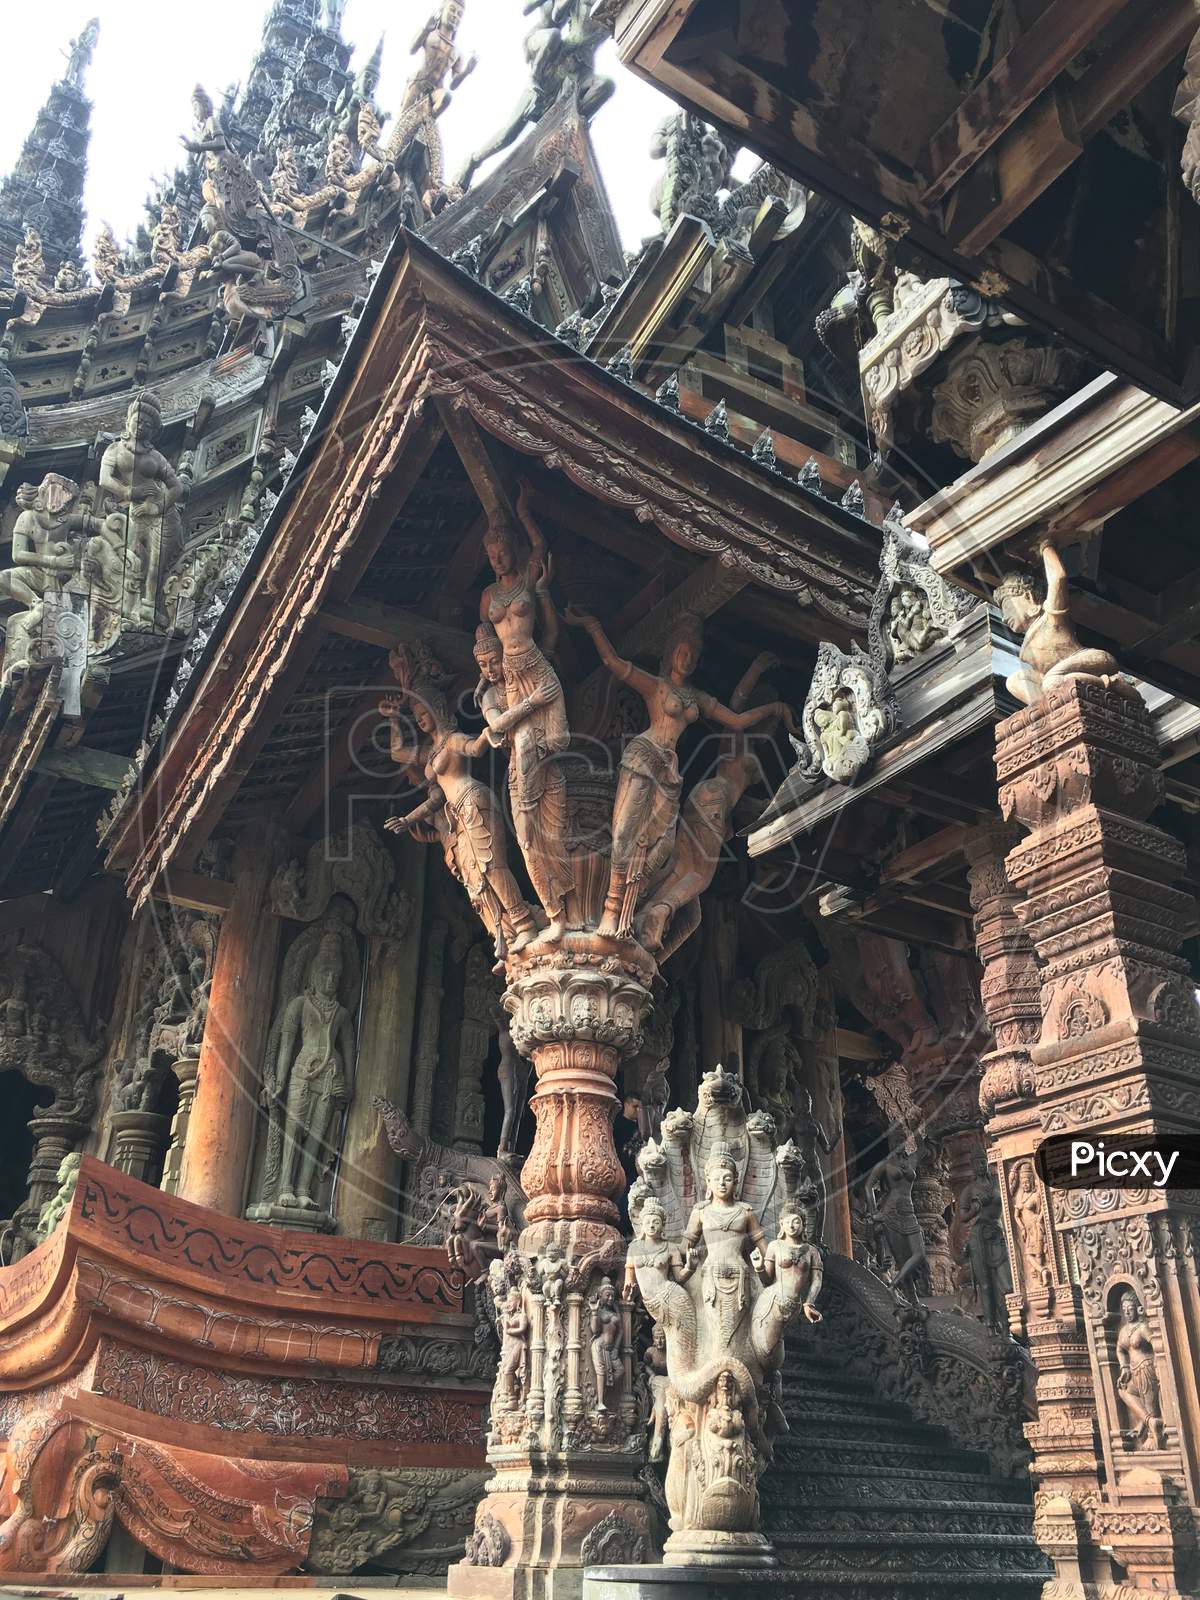 The Sanctuary of Truth is an unfinished Hindu-Buddhist temple and museum in Pattaya, Thailand. It was designed by the Thai businessman Lek Viriyaphan in the Ayutthaya style. It's a must vitis place inThiland and thousands visit to see the magnificient work of wooden sculptures.